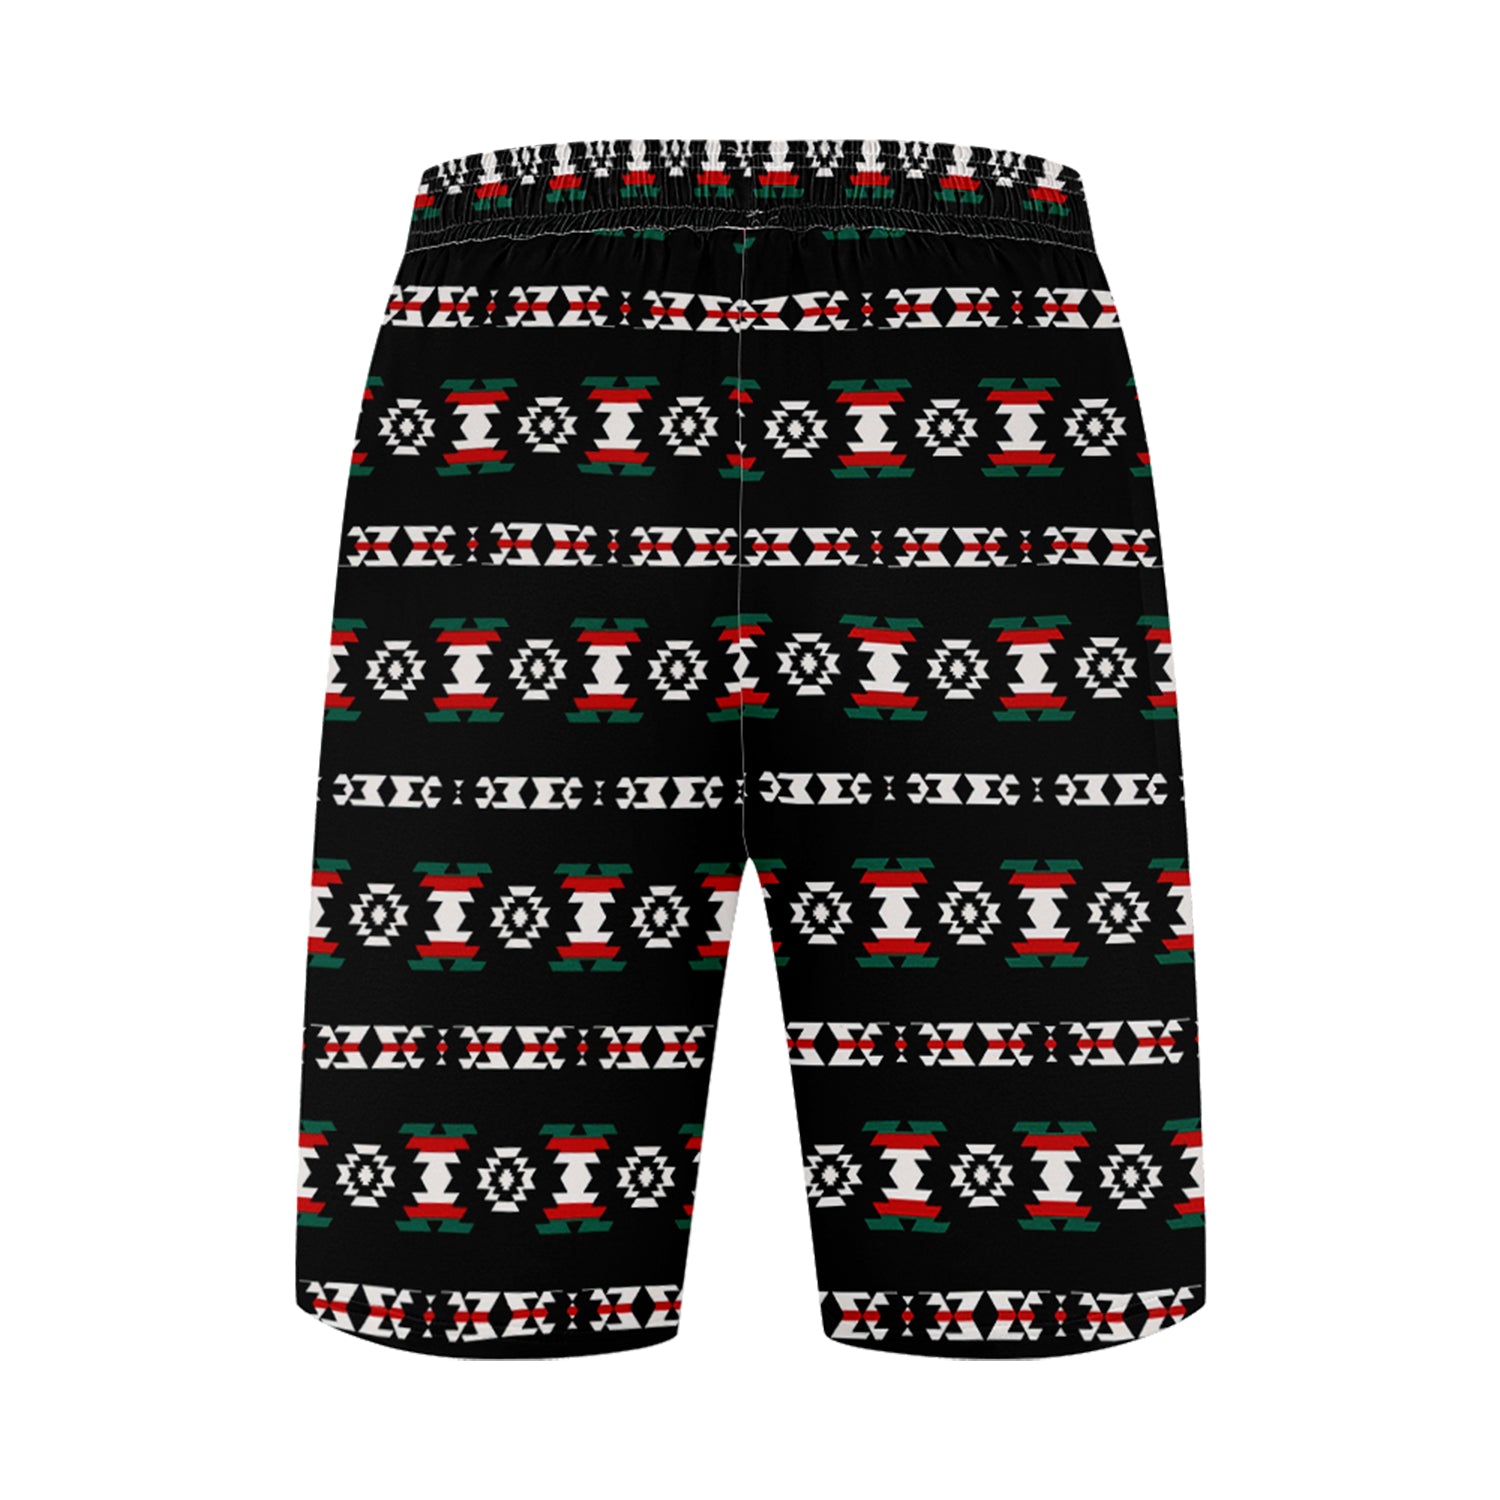 Cree Confederacy War Party Athletic Shorts with Pockets